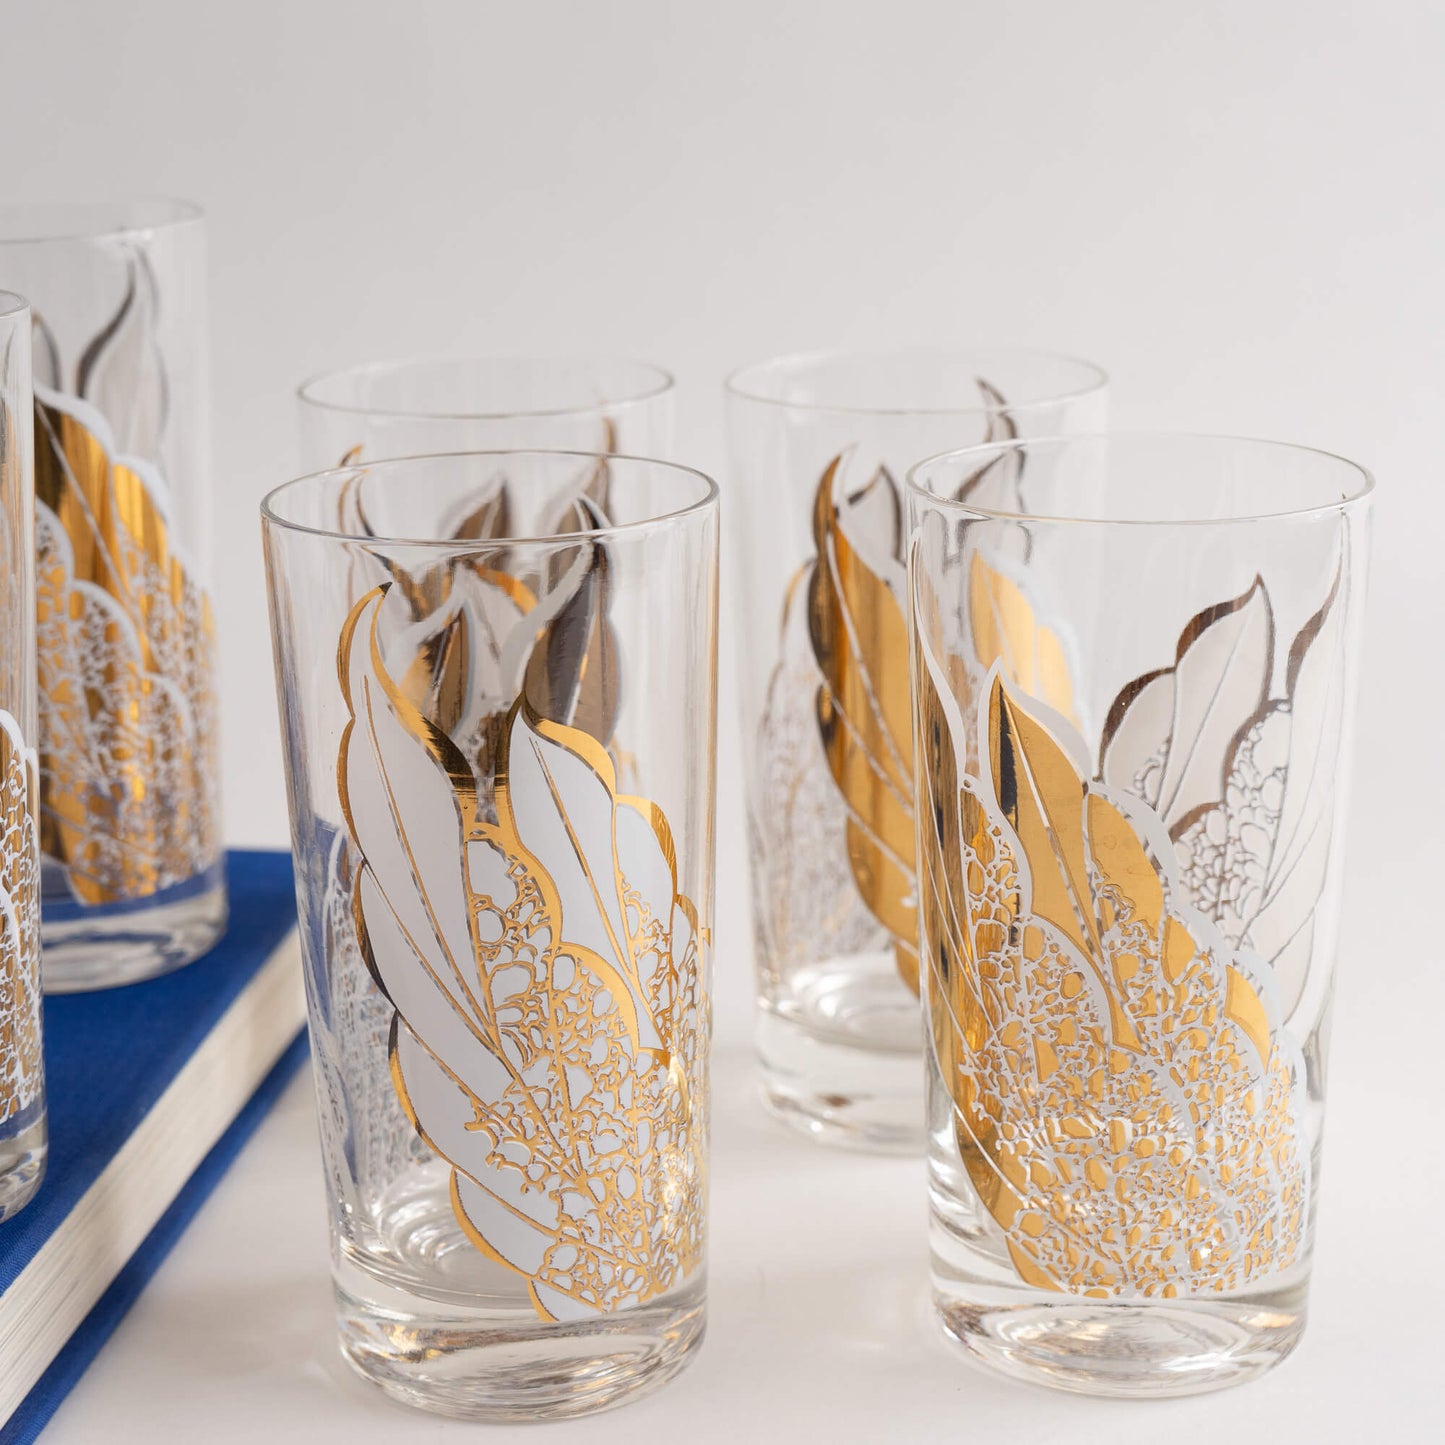 Set of 6 vintage highball cocktail glasses with a gold and white fan motif